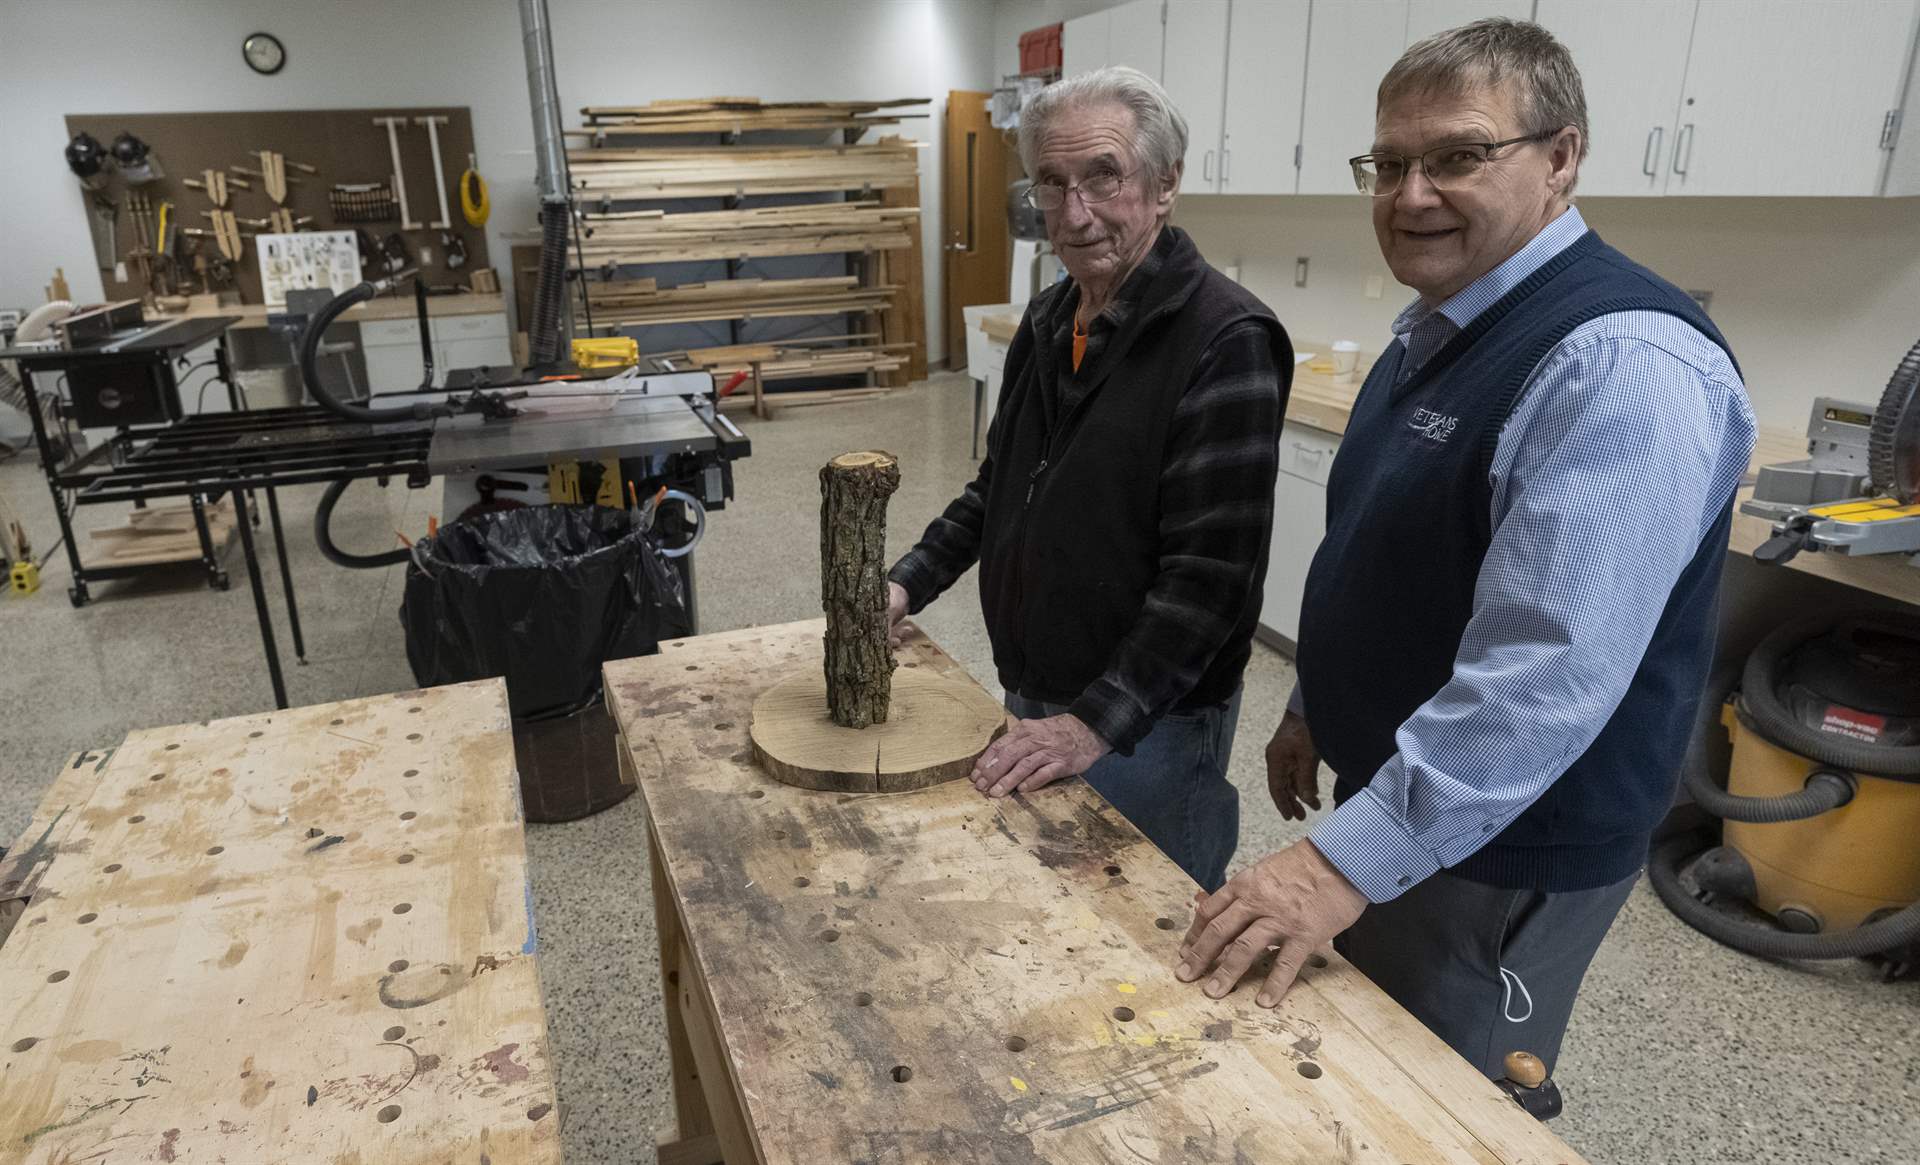 A resident and staff member of the North Dakota Veterans Home standing next to a workbench in the woodshop.